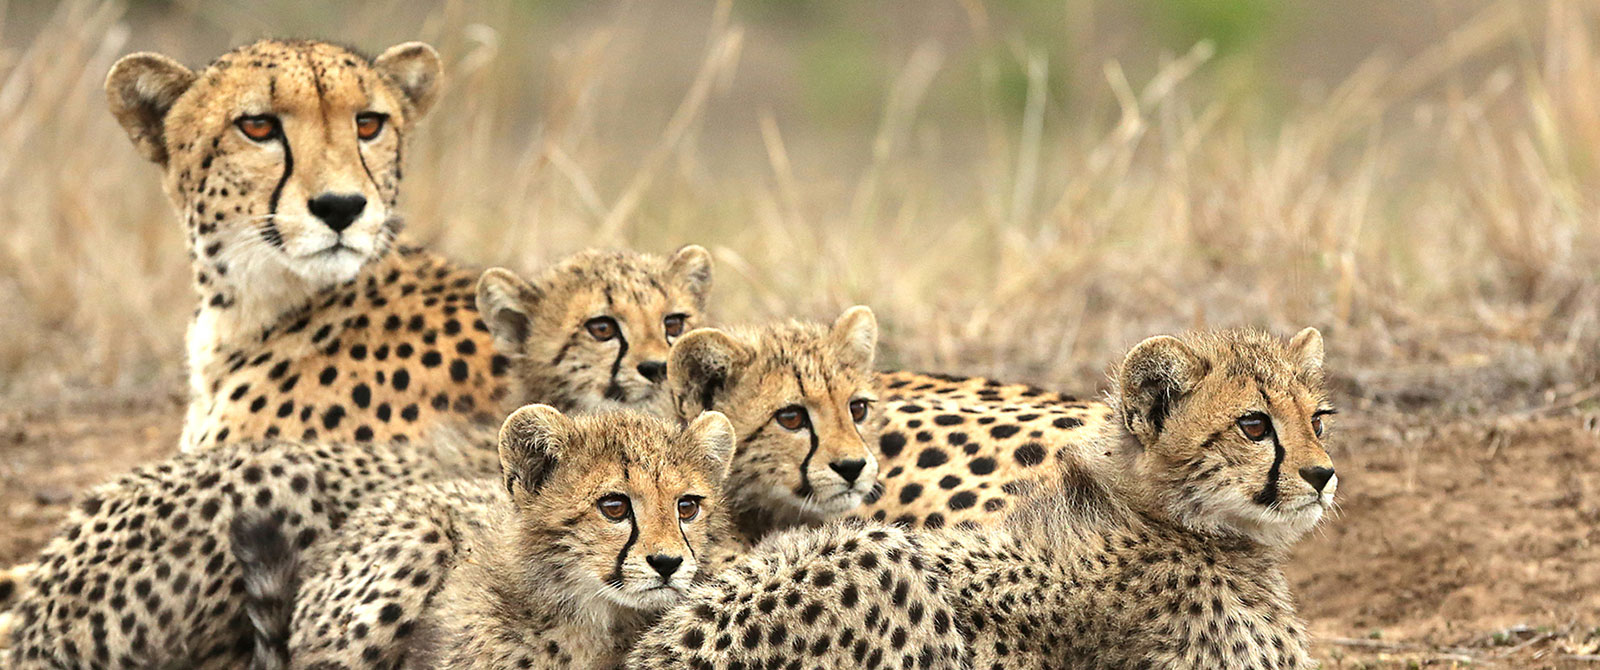 Cheetah and Cubs on &Beyond Phinda Private Game Reserve